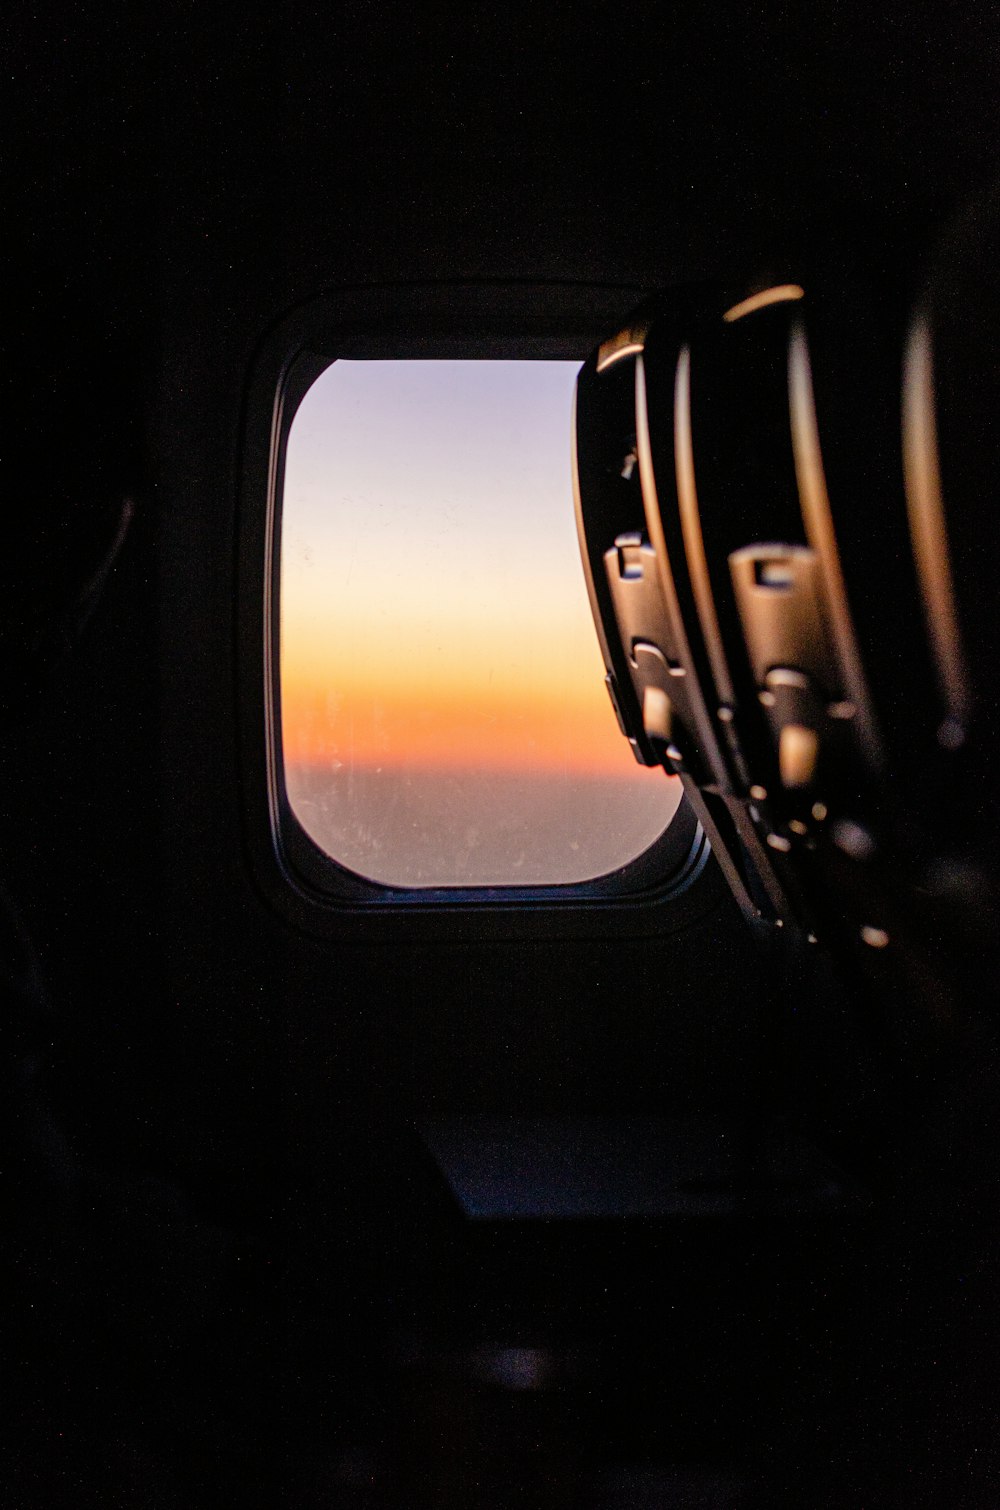 a view of the sunset through a window